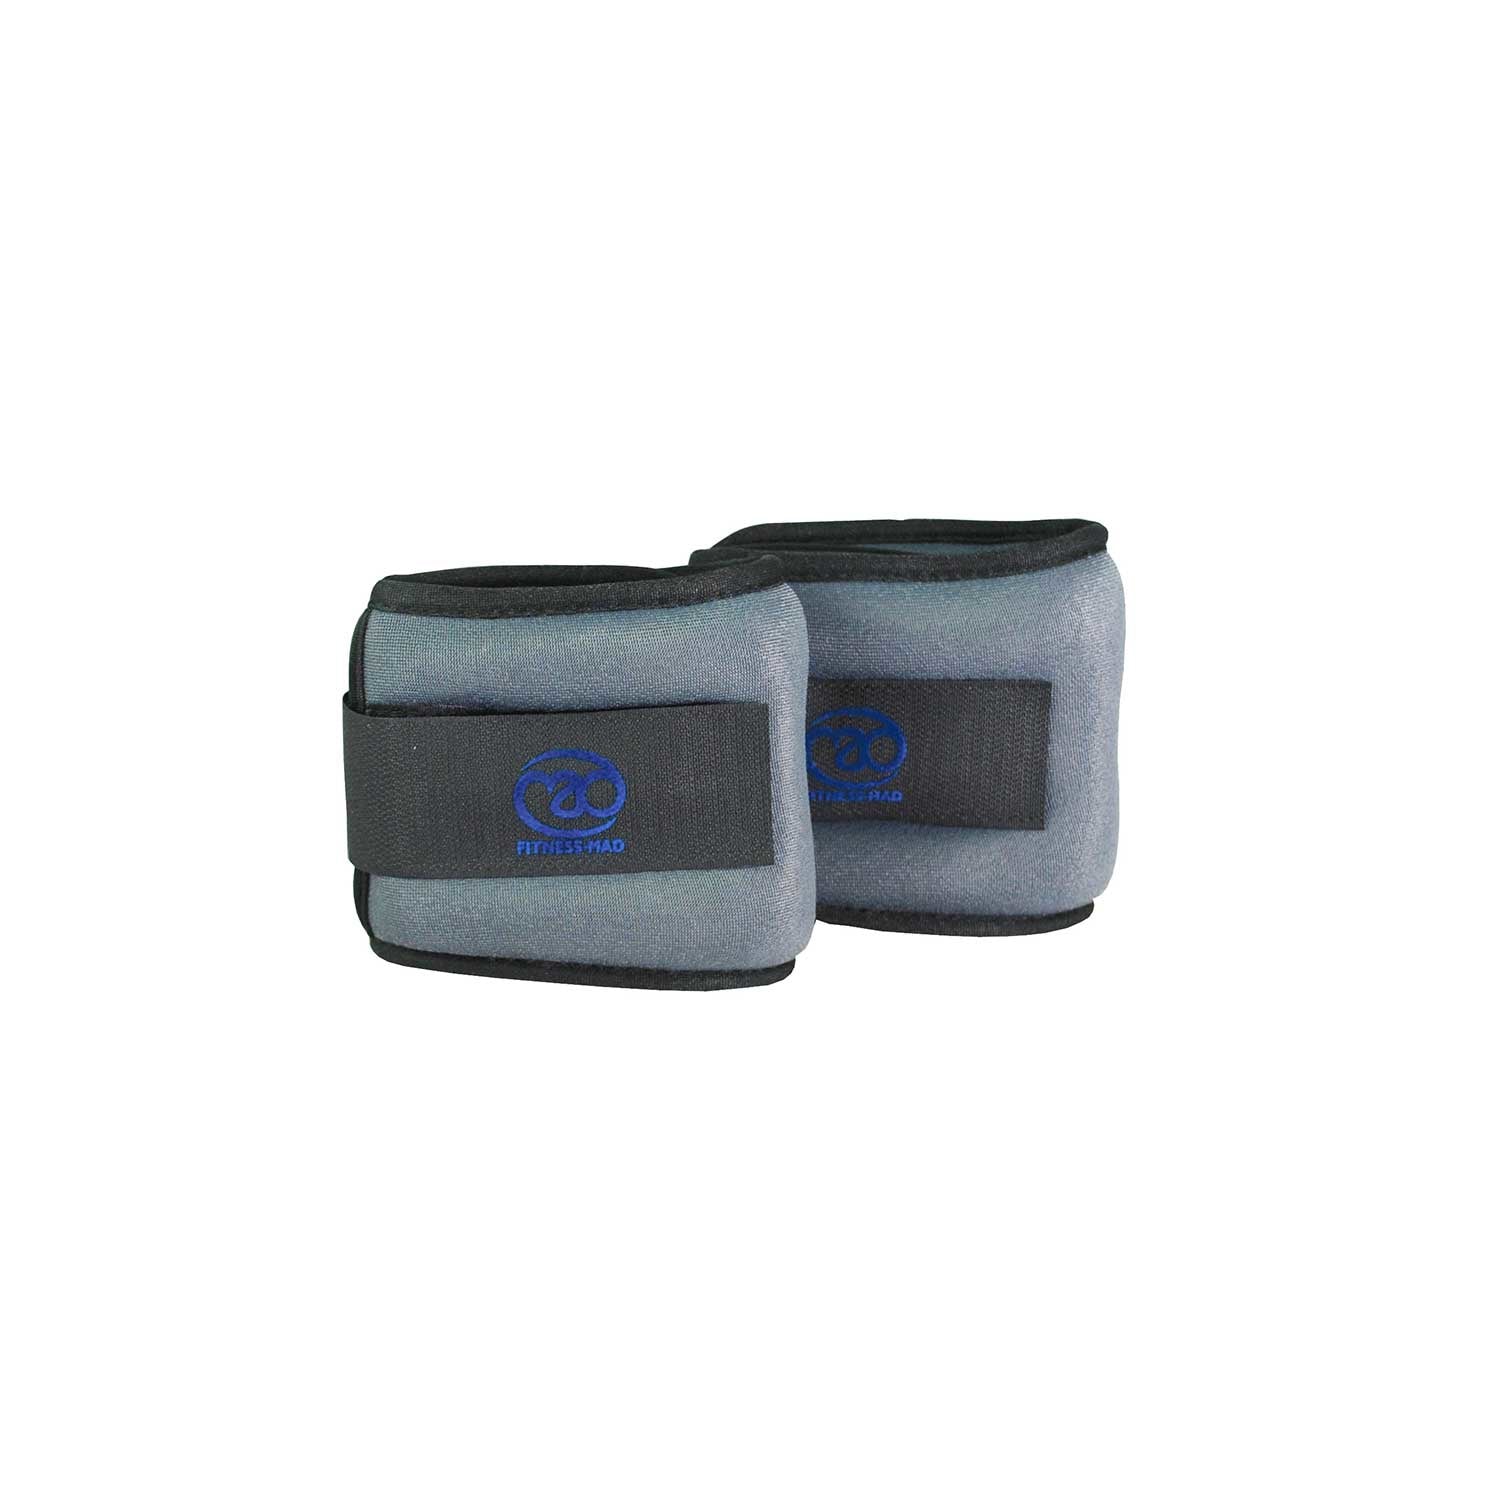 Wrist & Ankle Weights - 2 x 0.5kg